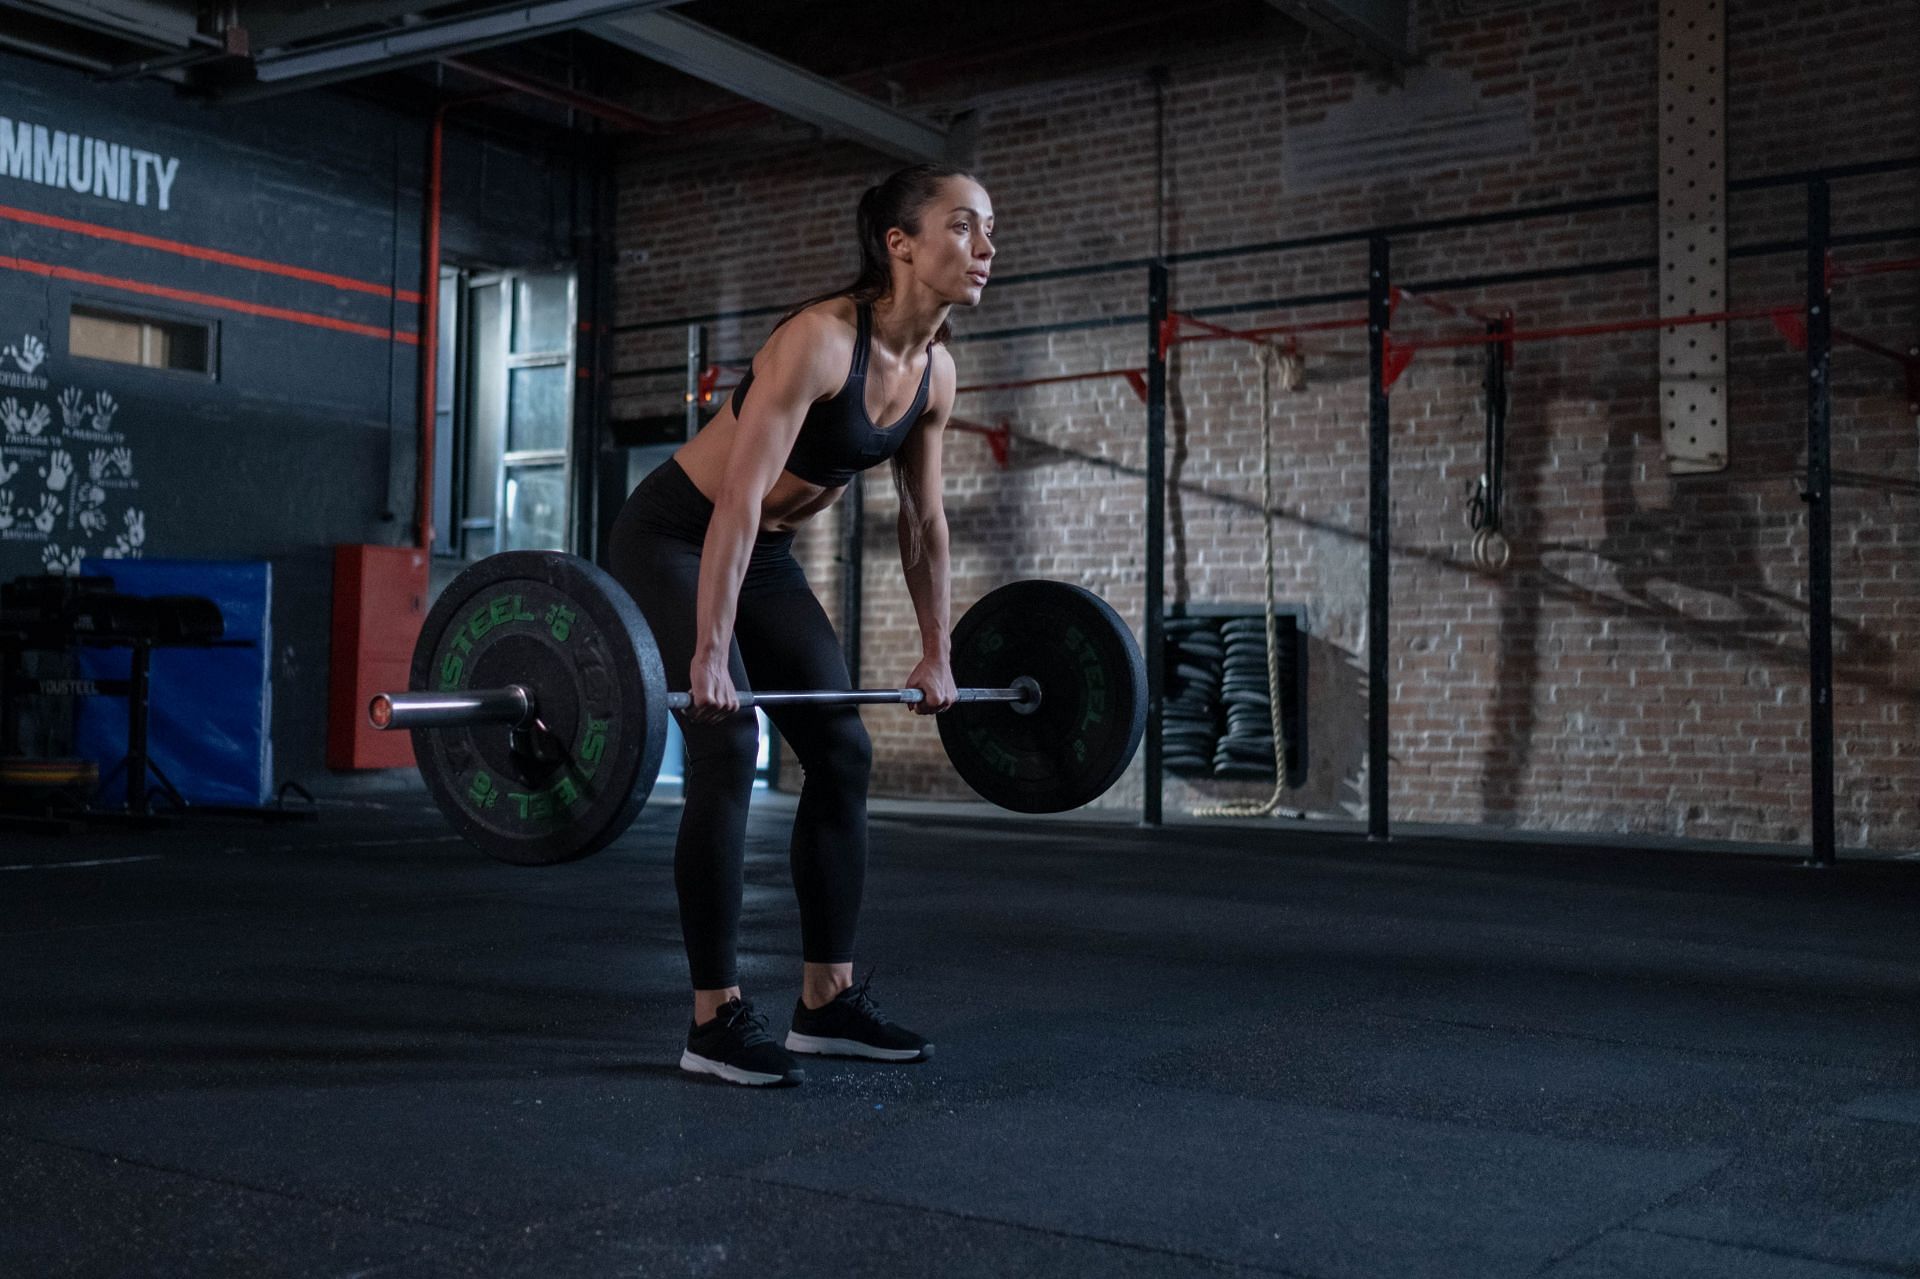 Deadlifts are great for working out the glutes and hamstrings. (Image via Pexels/Cottonbro Studio)